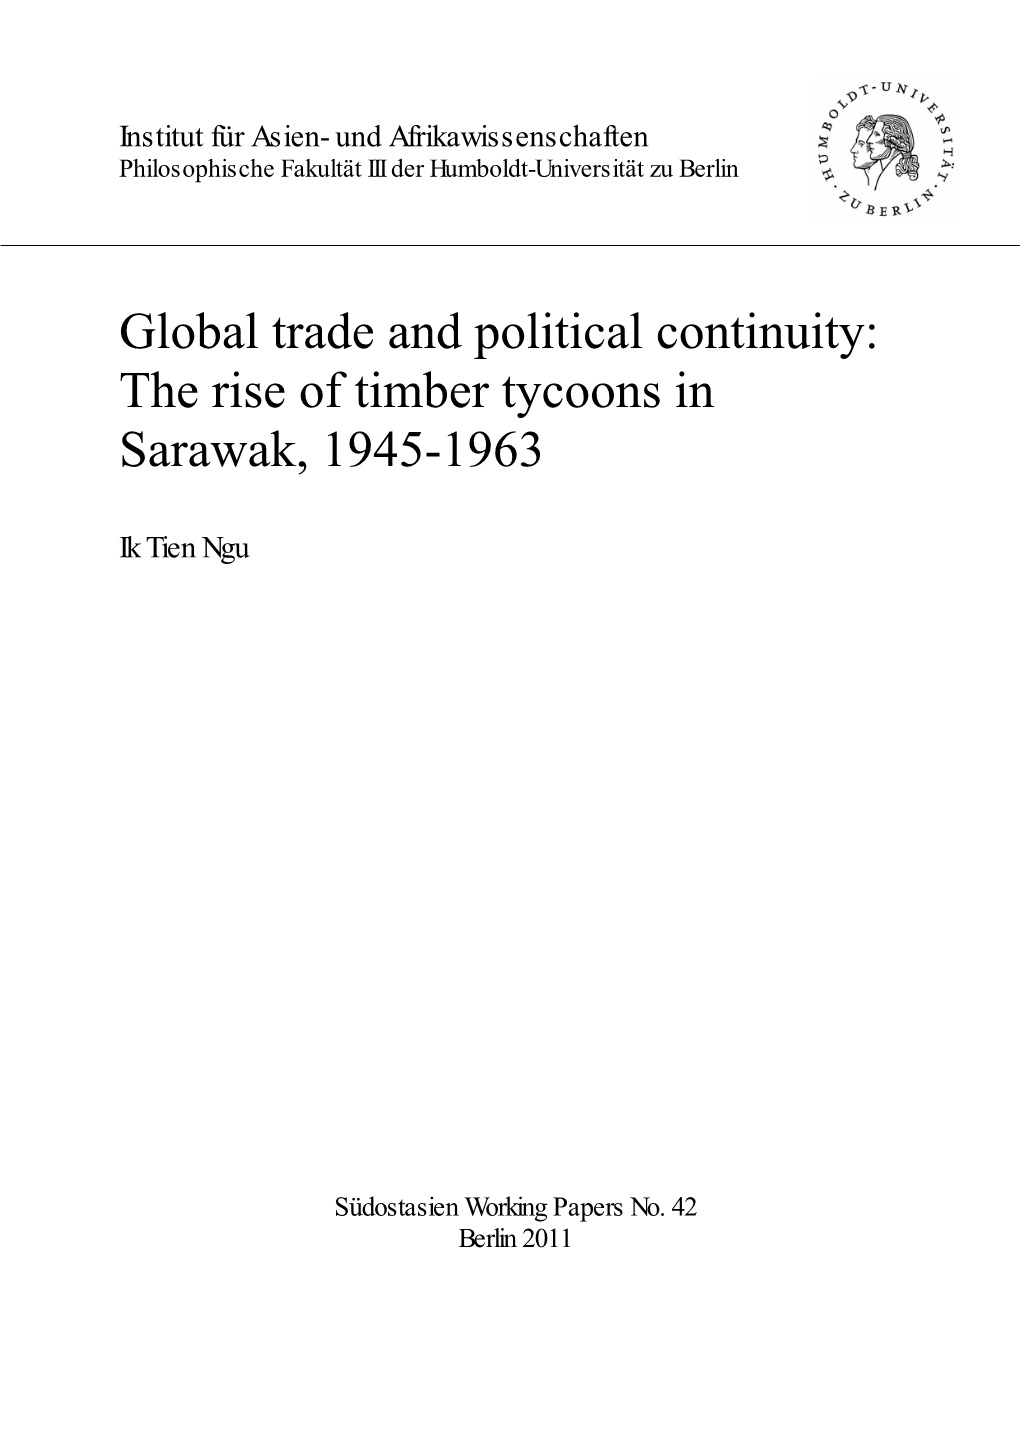 The Rise of Timber Tycoons in Sarawak, 1945-1963